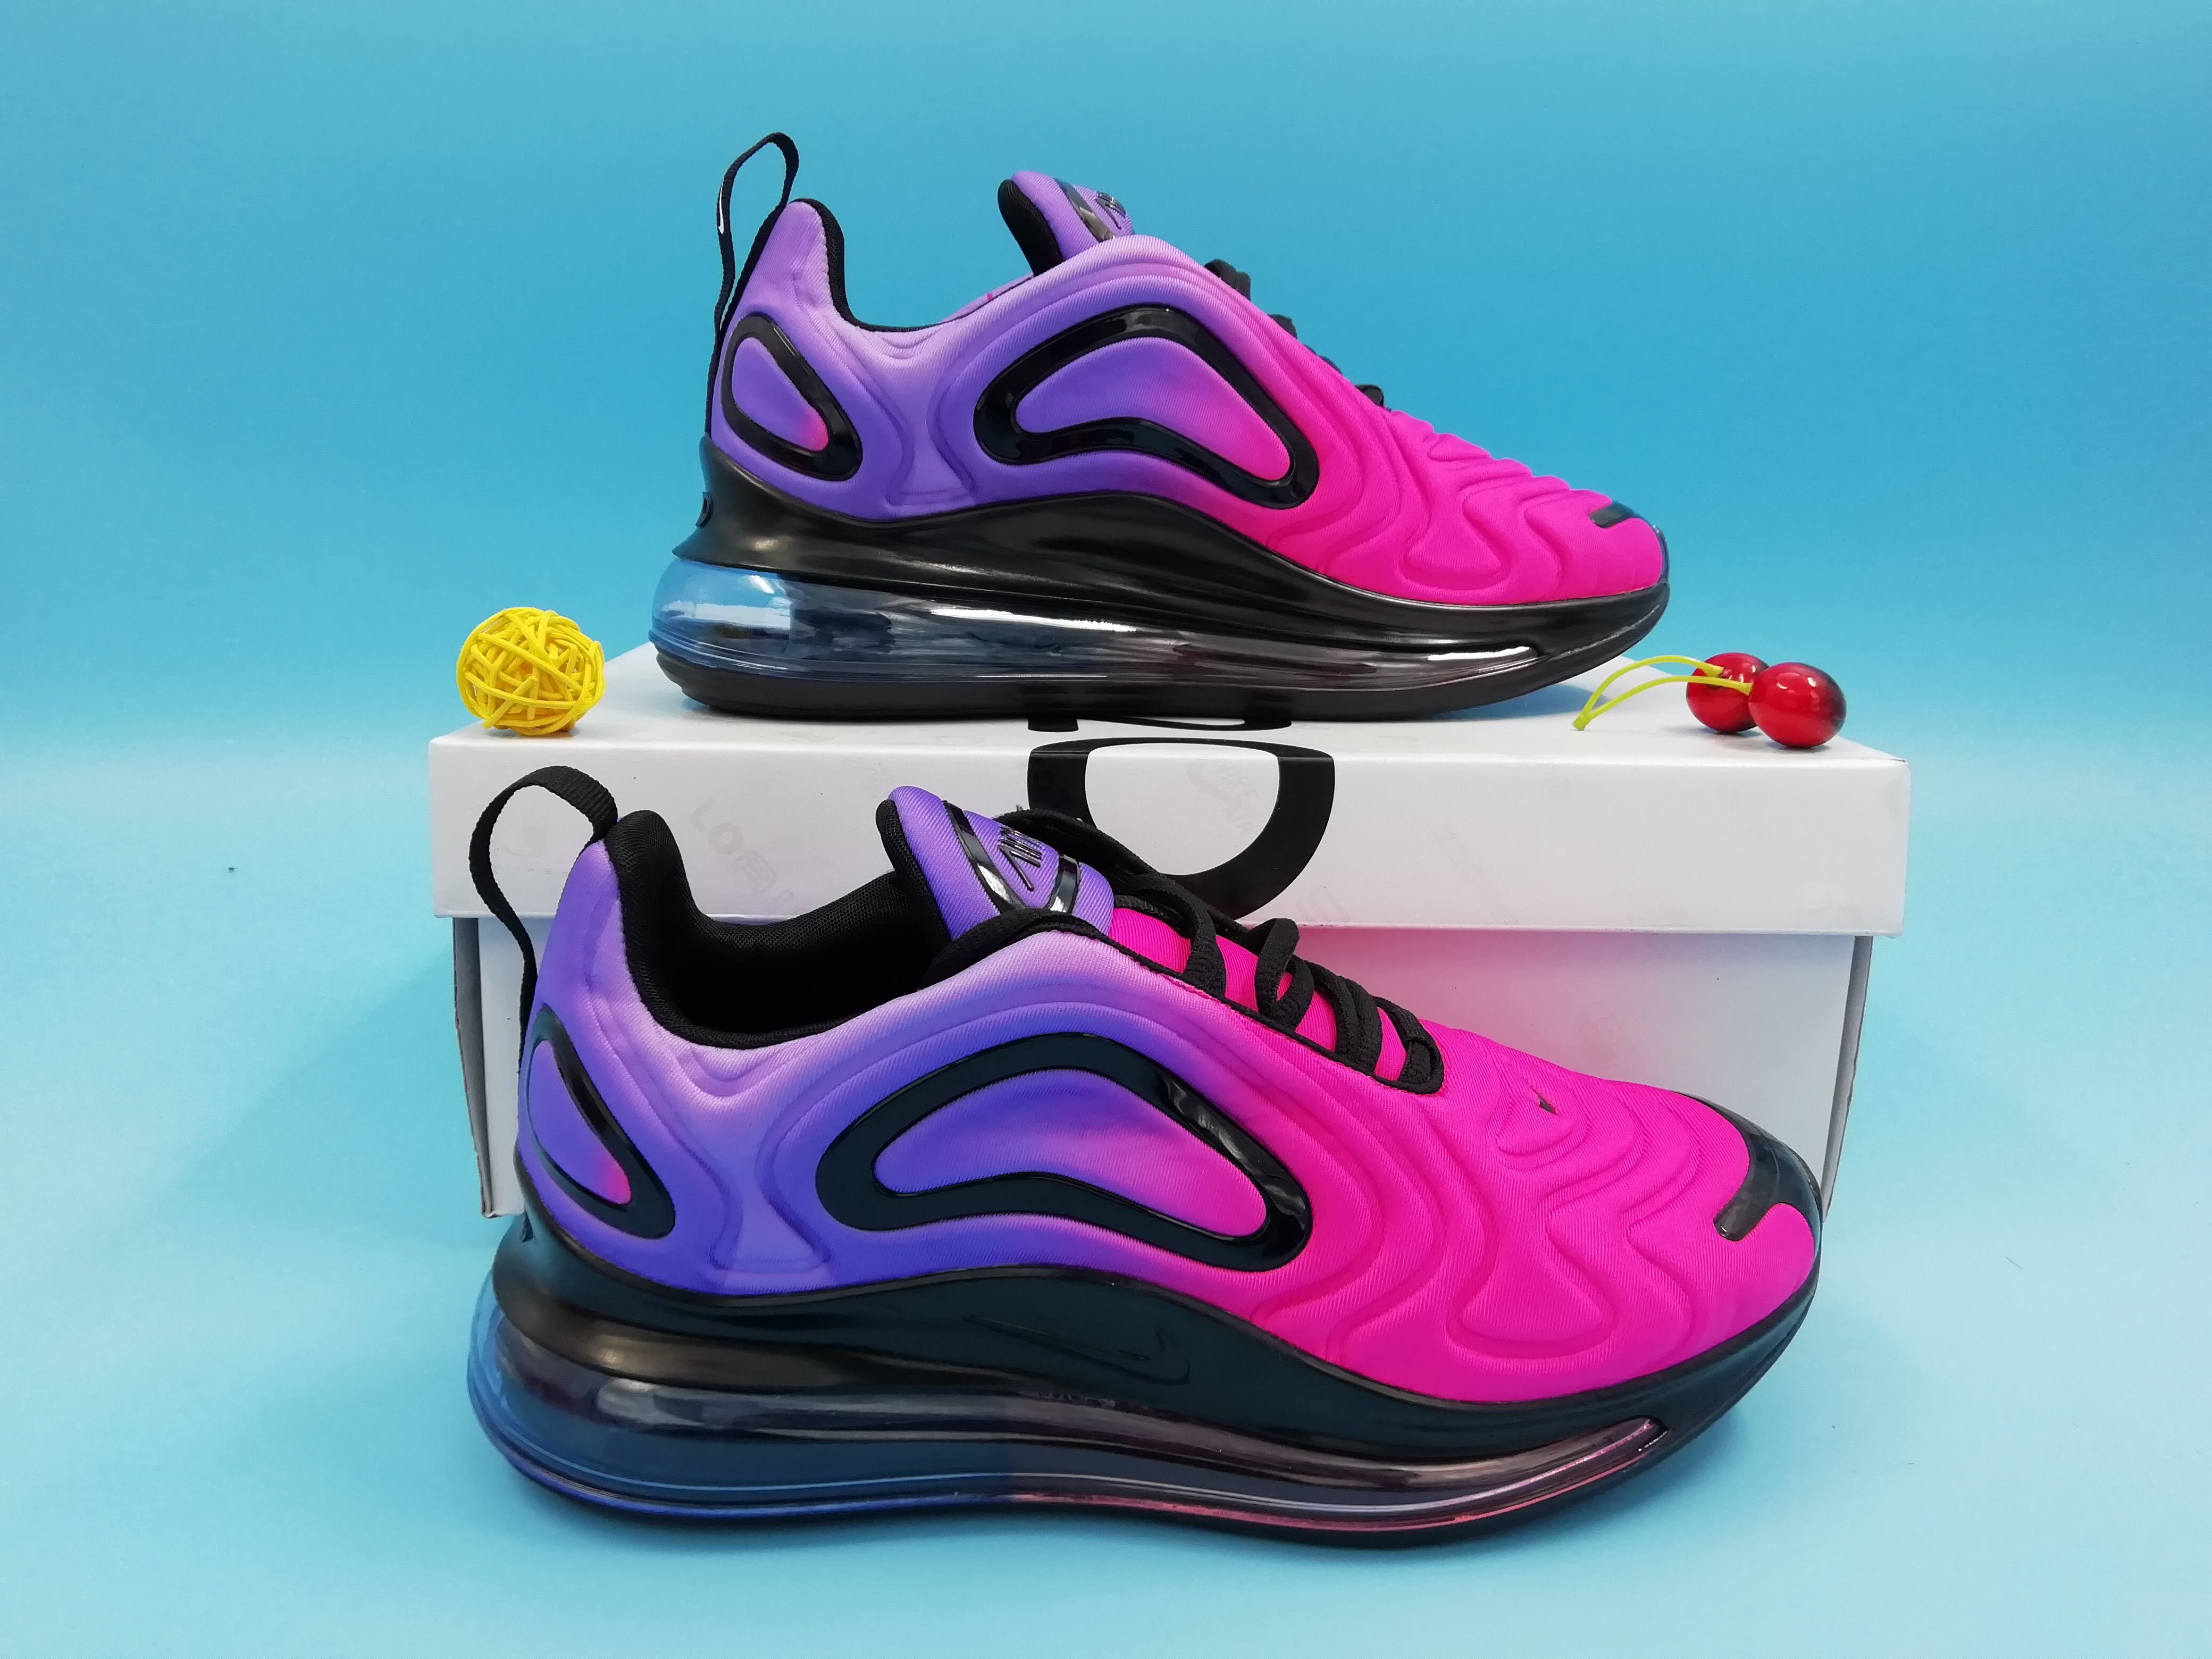 Off-white Nike Air Max 720 Red Purple Black Shoes